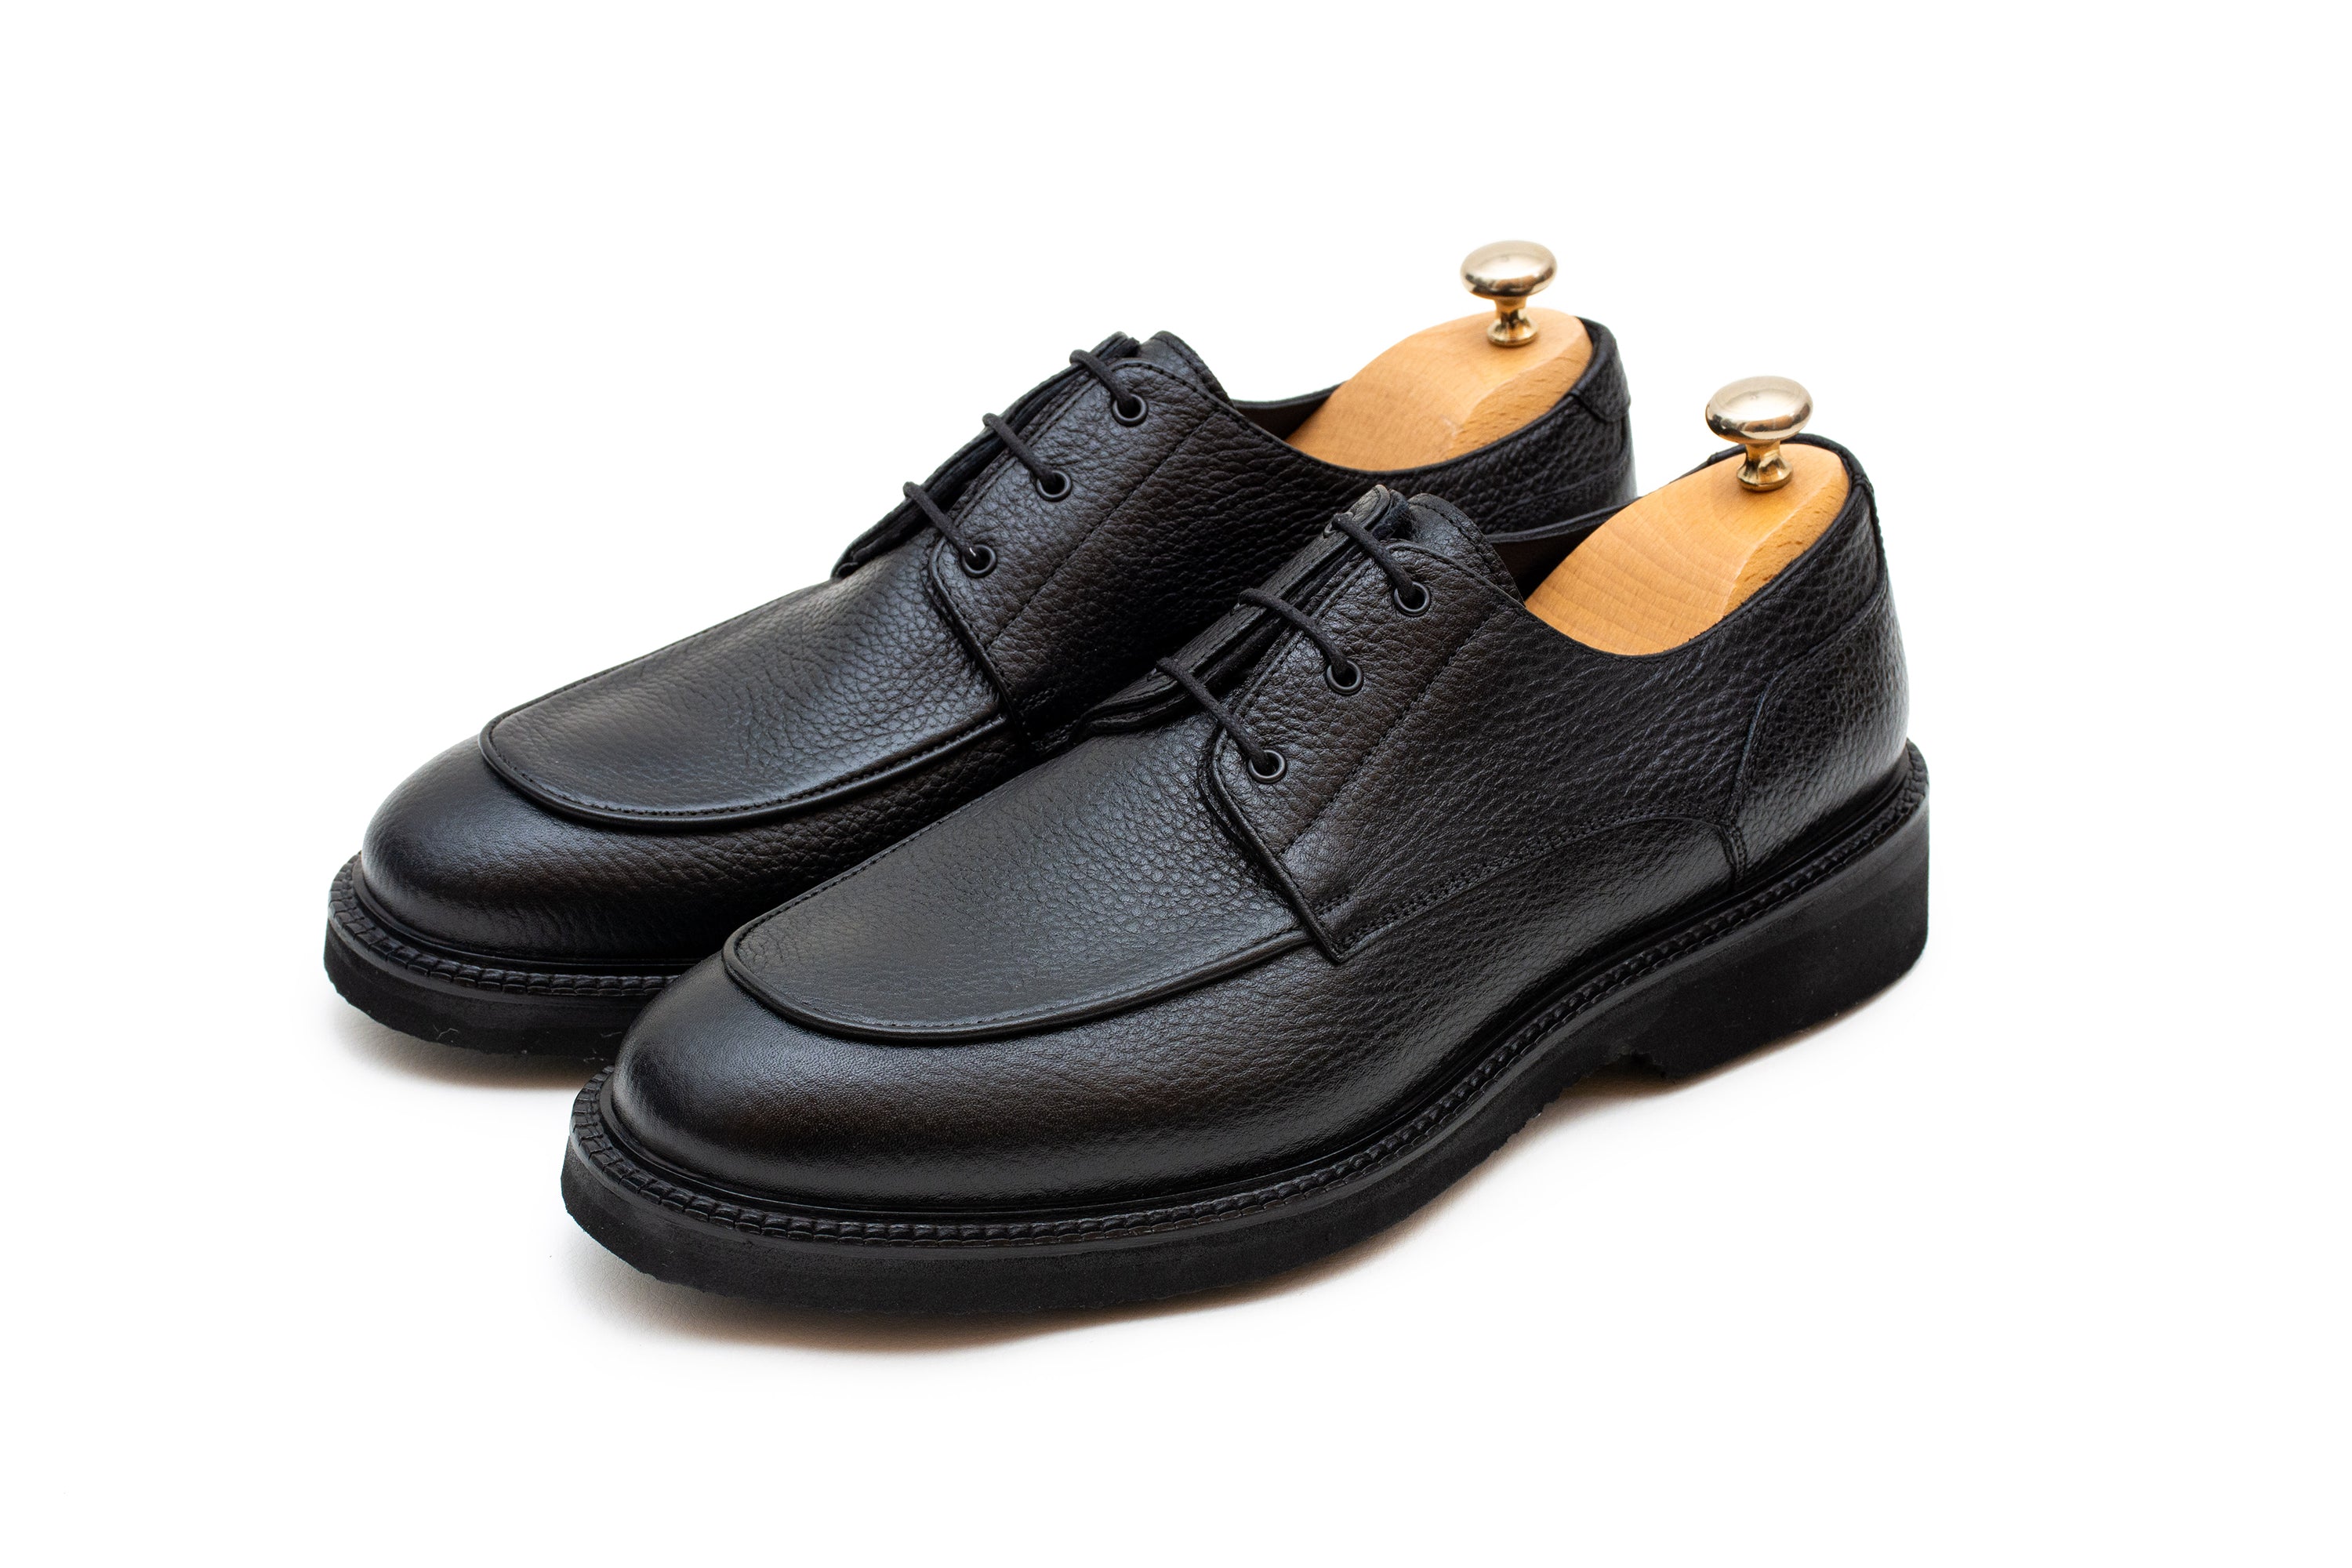 Classic 3 Hole Derby Shoe – Relevance For Men